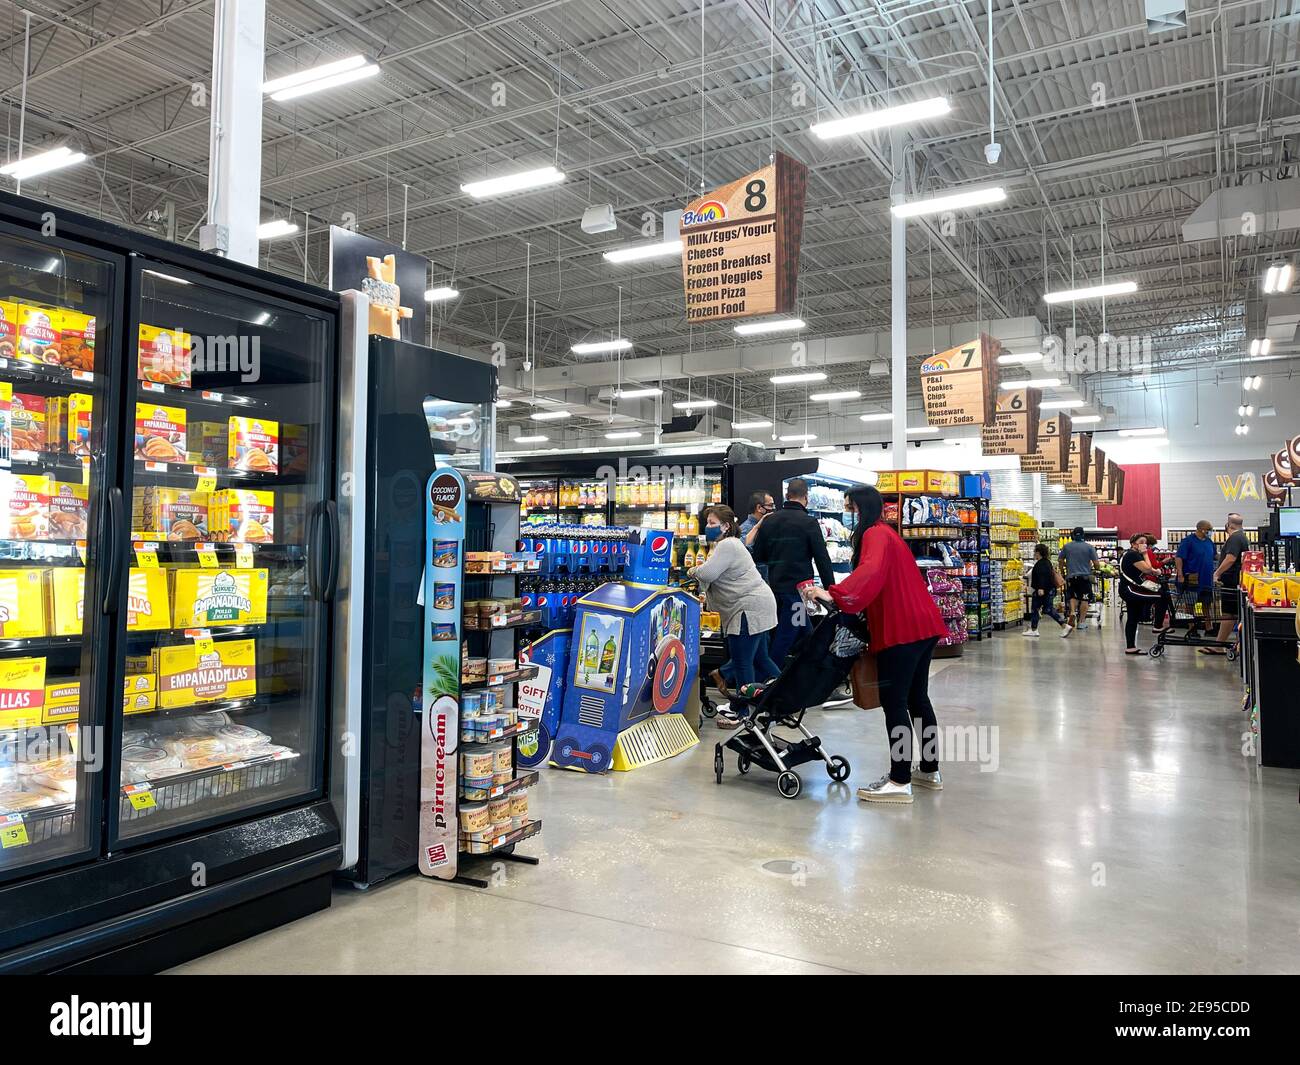 Orlando, FL USA - December 27, 2020: An overview of multiple aisles of a Bravo Market grocery store in Orlando, Florida. Stock Photo